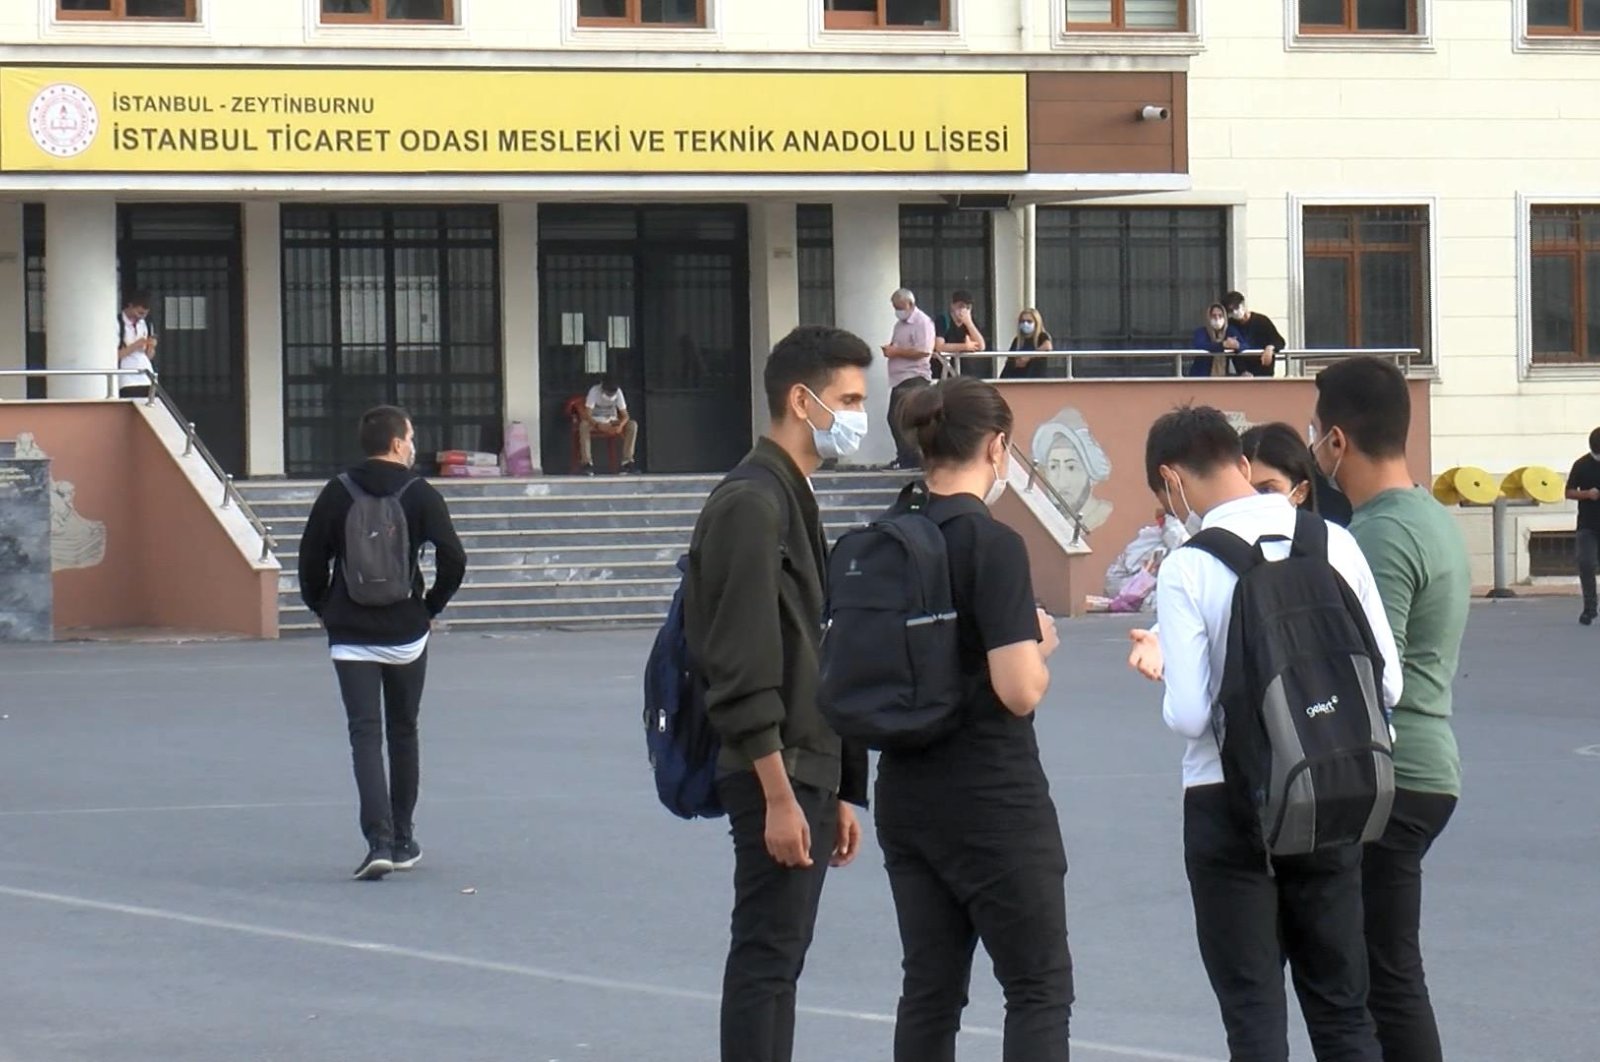 Students wear masks outside a vocational school in the Zeytinburnu district of Istanbul, Turkey, Oct. 5, 2020. (DHA Photo)